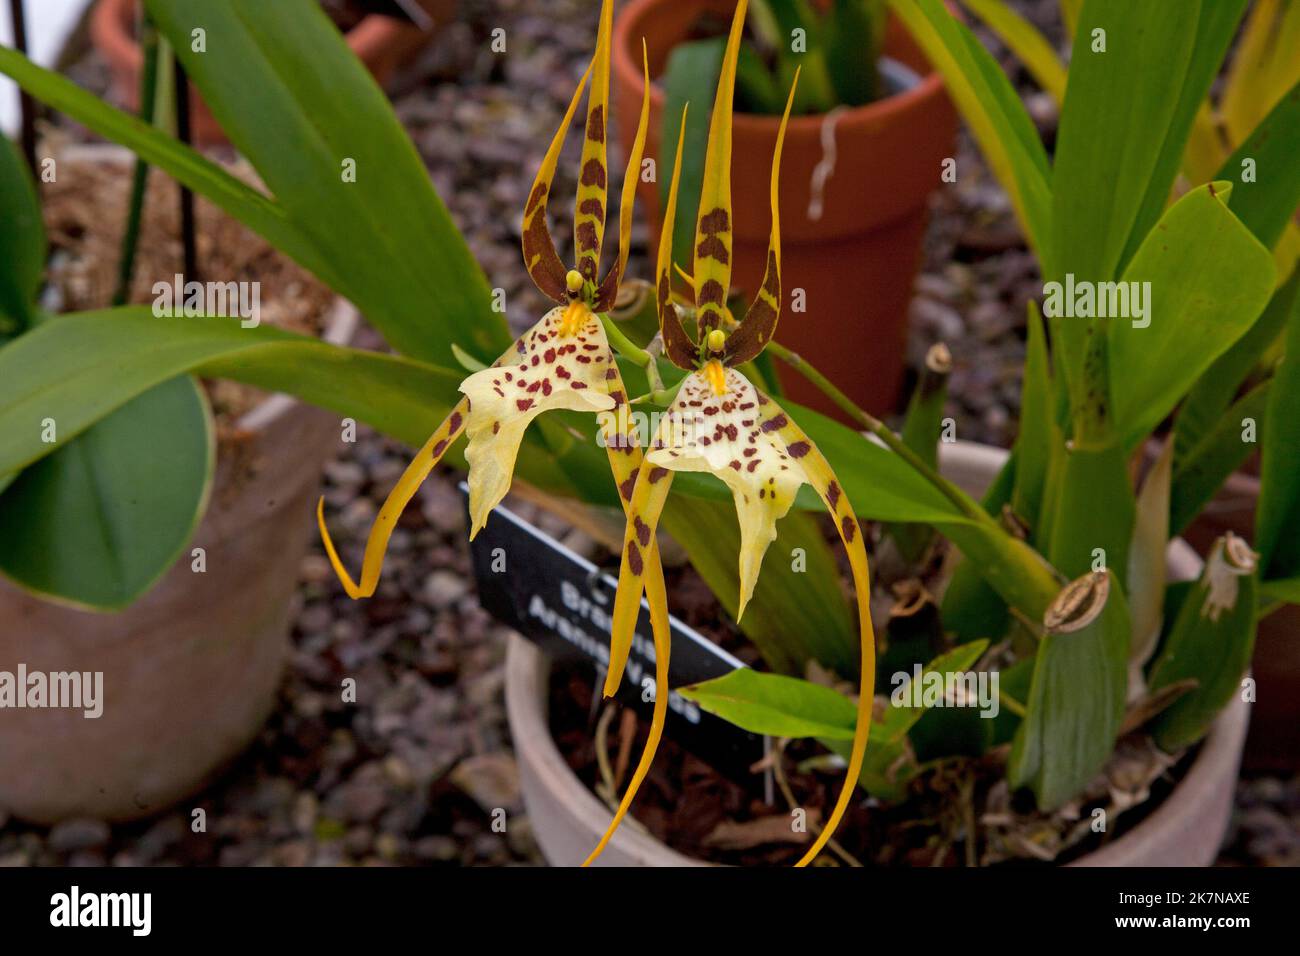 Brassea Orchid spotted yellow exotic tropical flowering plant with red spots in a greenhouse Stock Photo